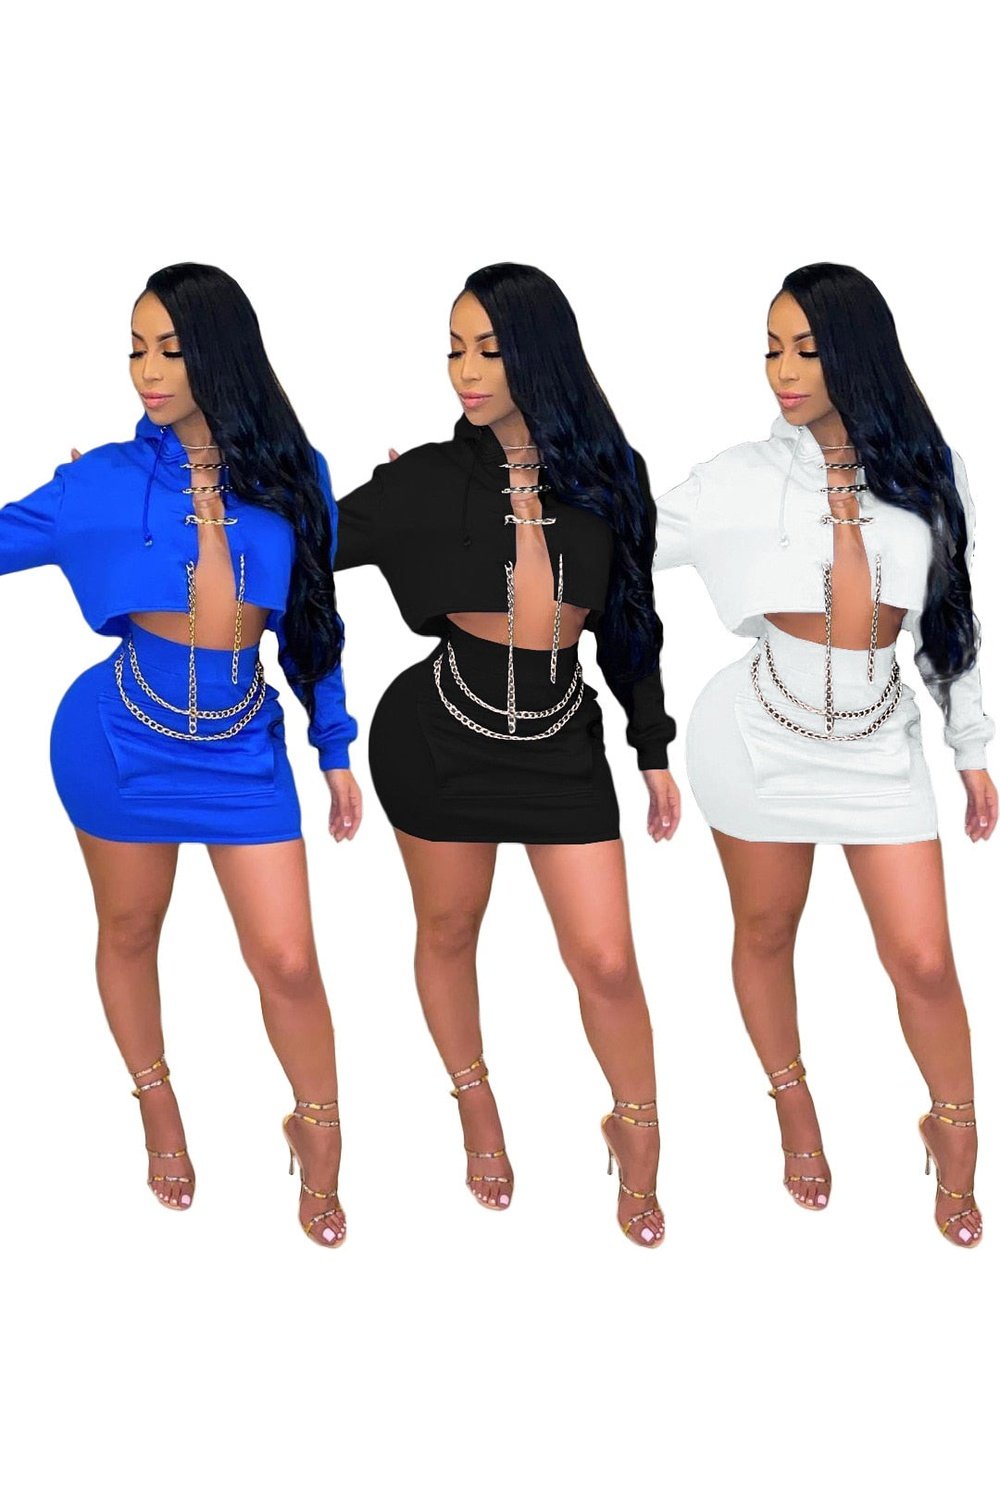 Trendy chain crop top skirts two piece skirt set